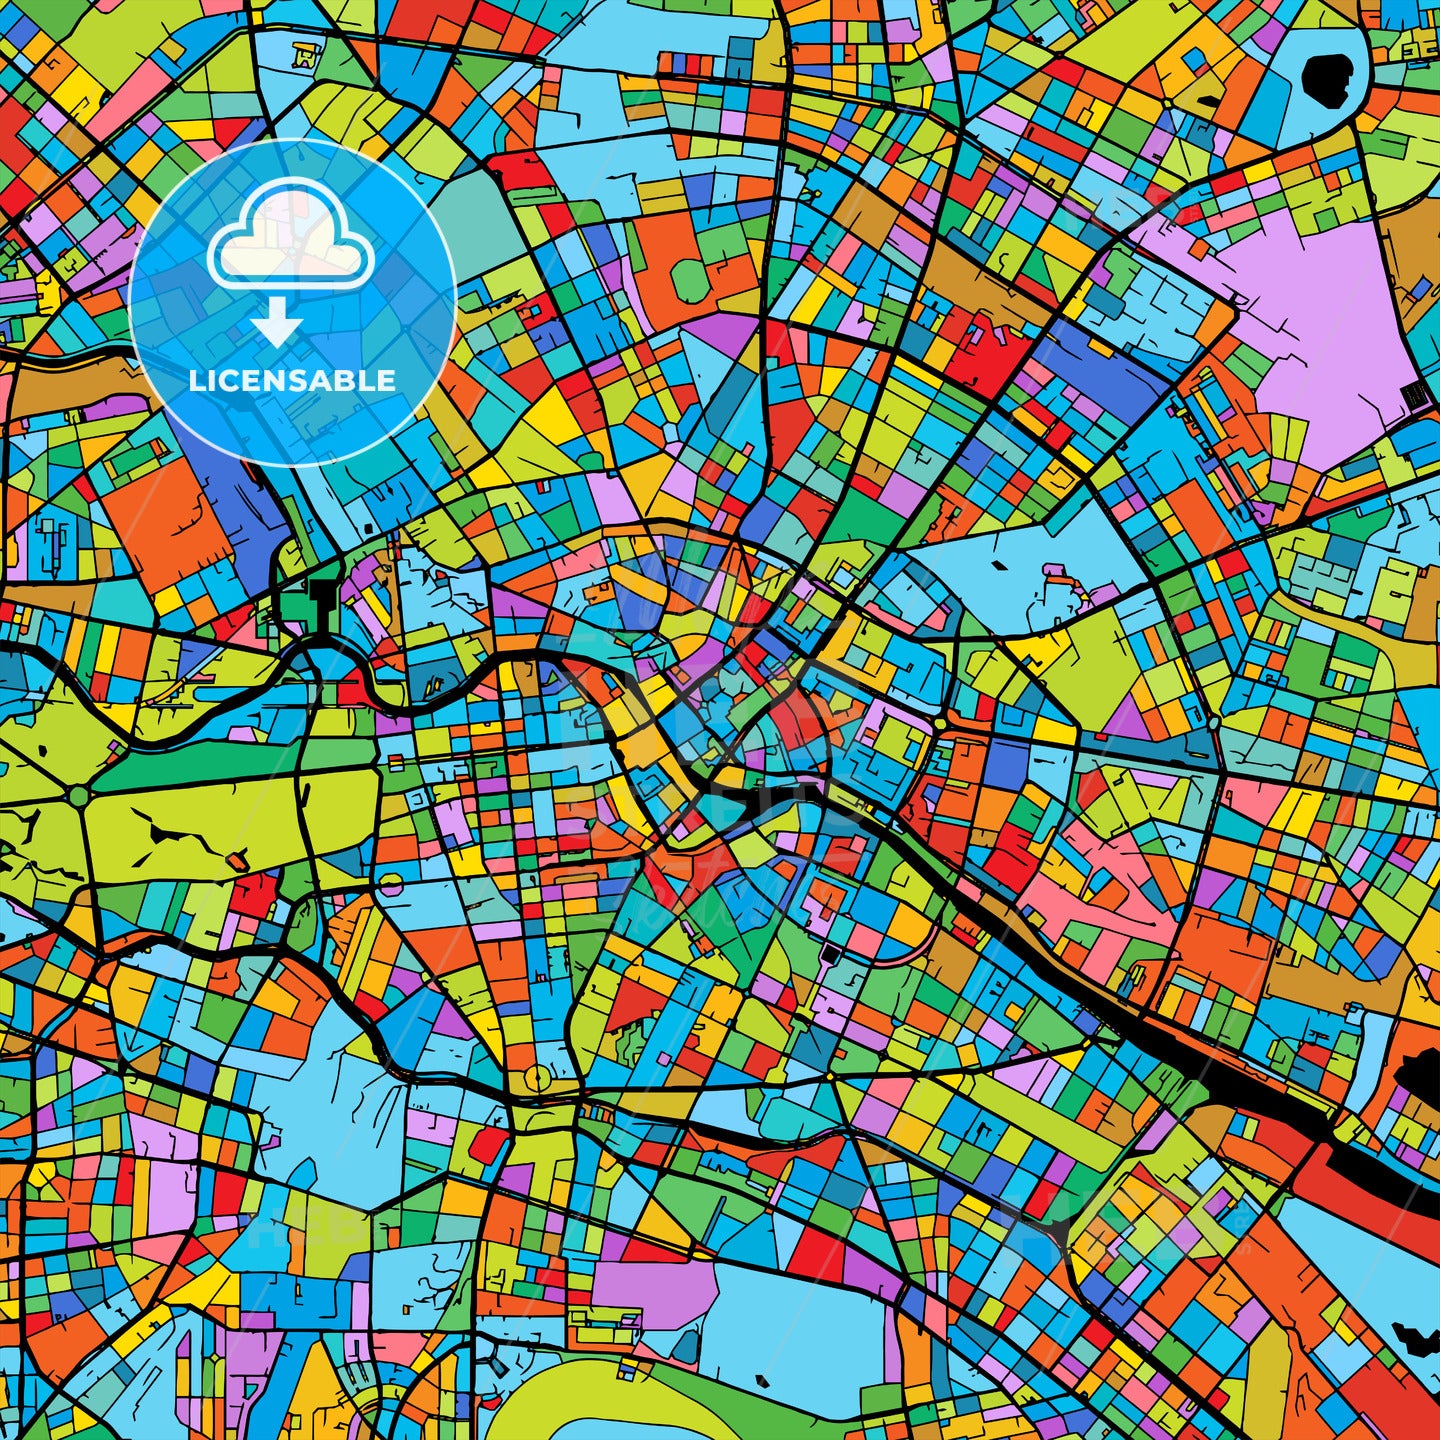 Berlin Colorful Vector Map on Black